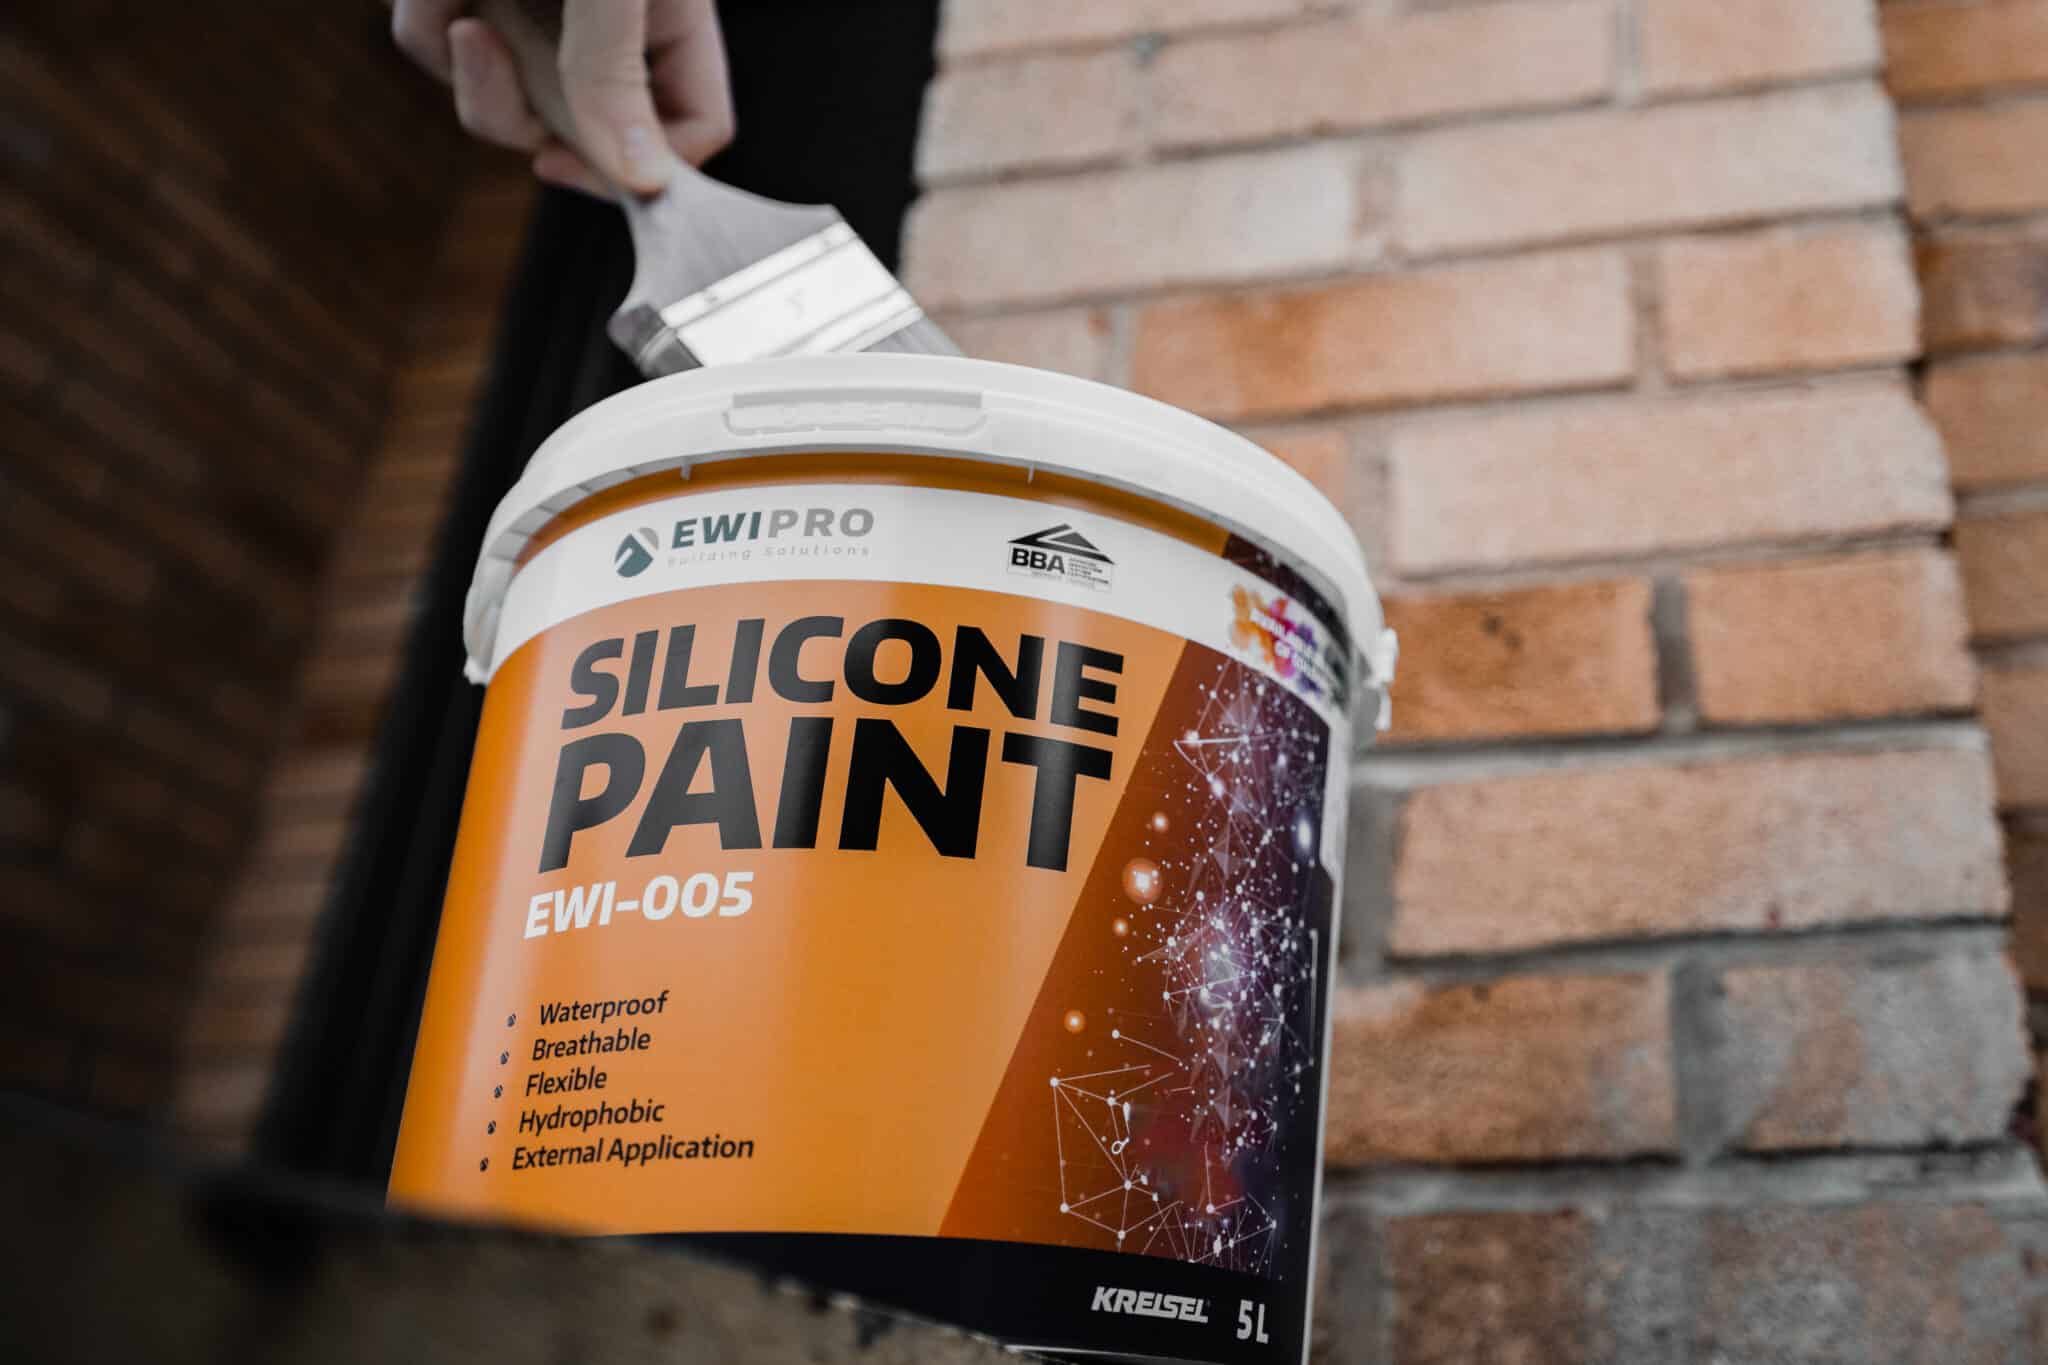 Silicone Paint is the right paint